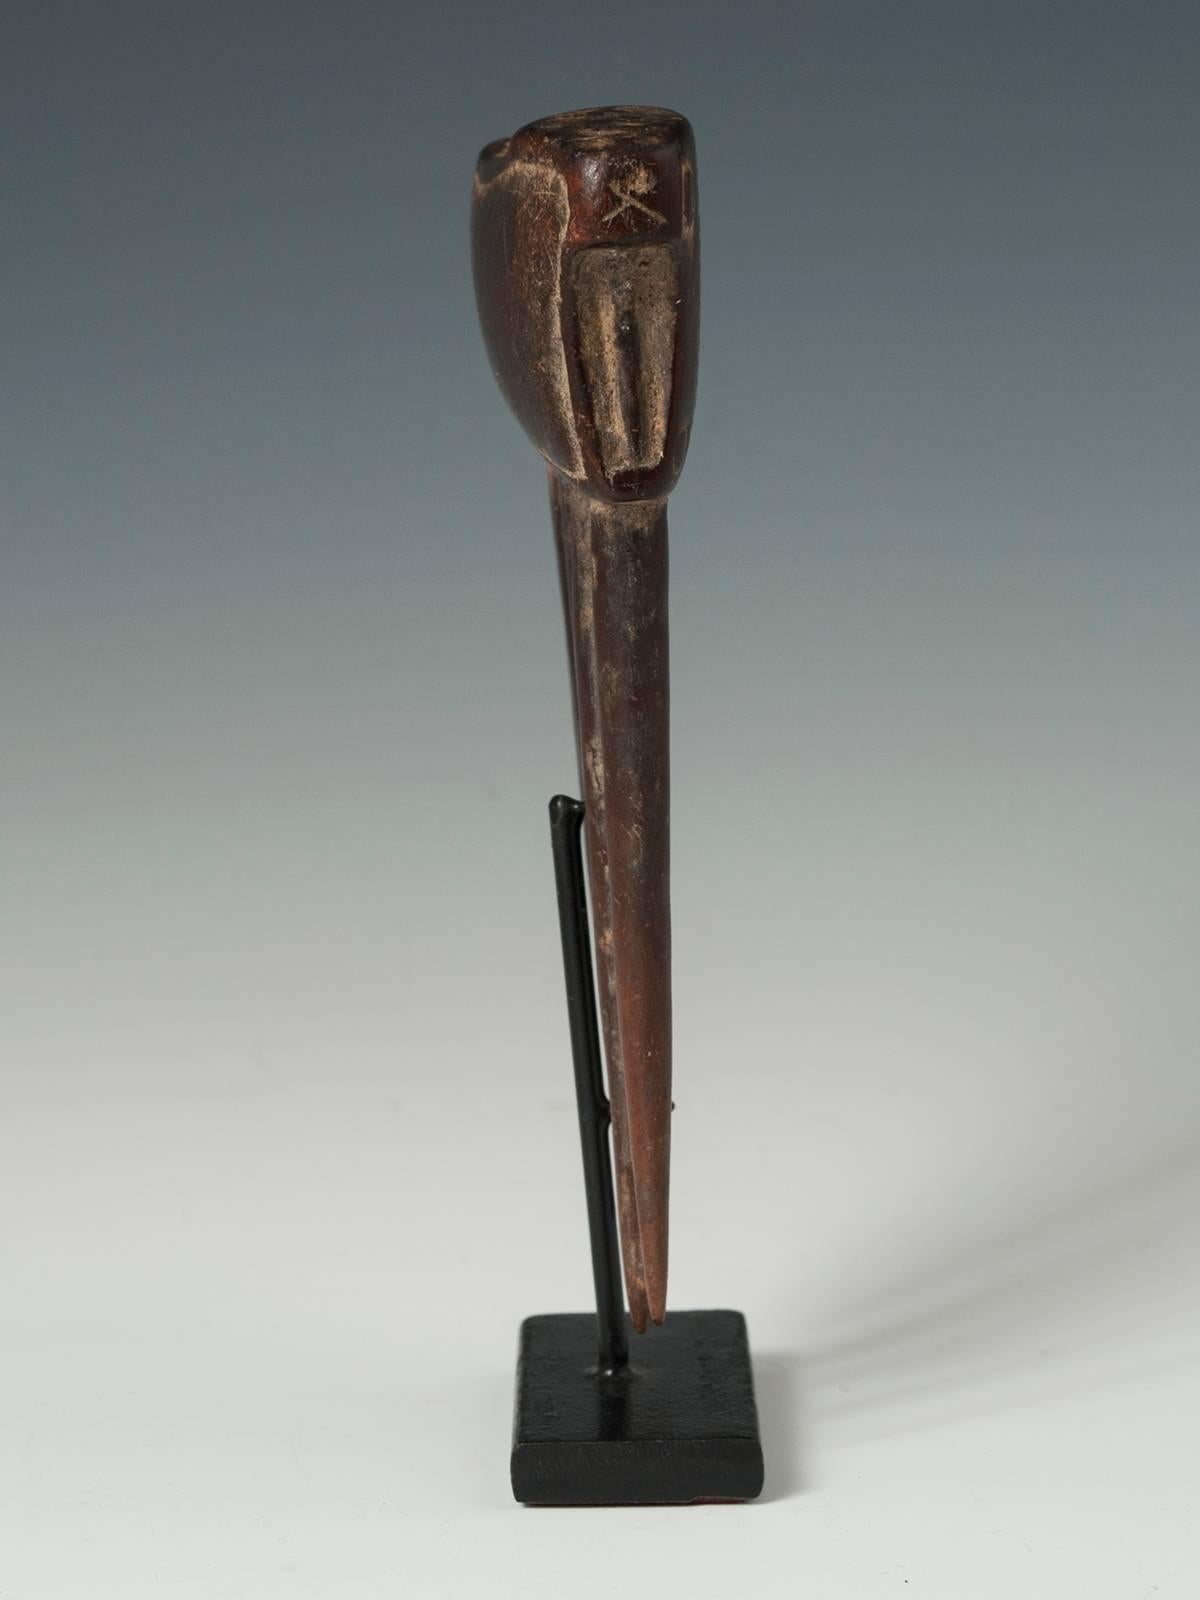 Hand-Carved Mid-20th Century Tribal African Wood Comb from the Baule, Cote d'Ivoire